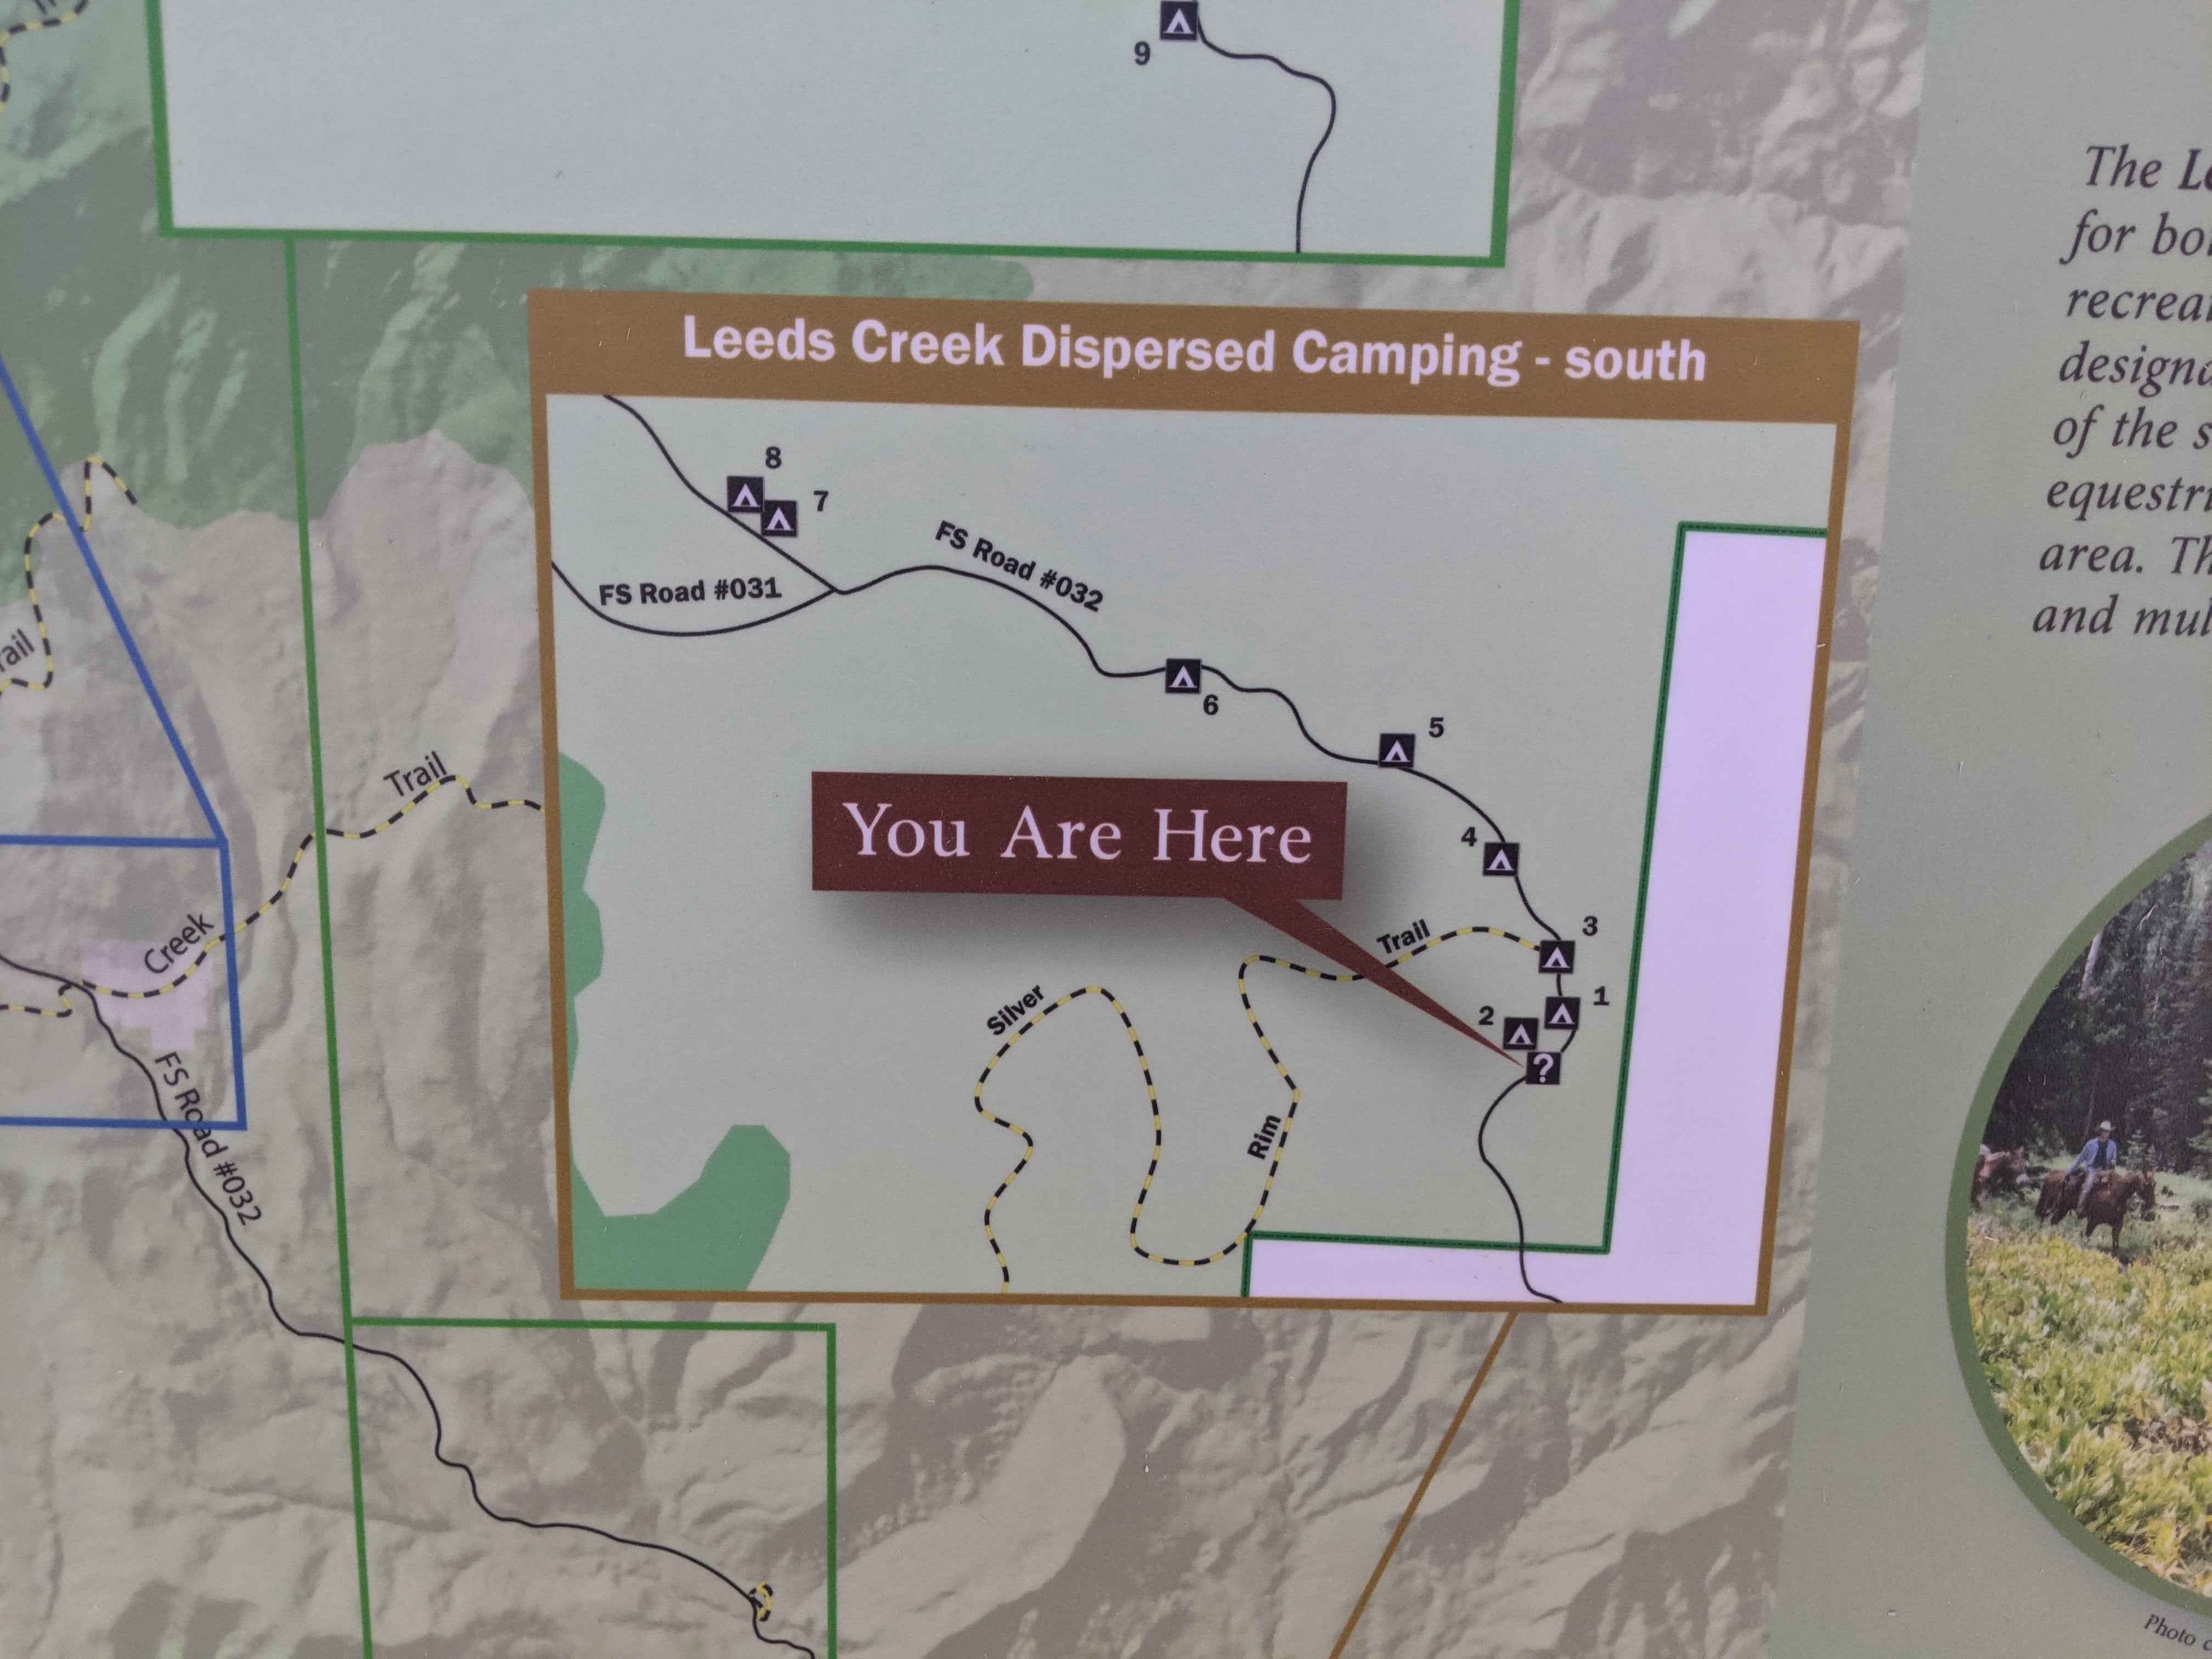 Camper submitted image from Leeds Canyon Dispersed #4 - 5